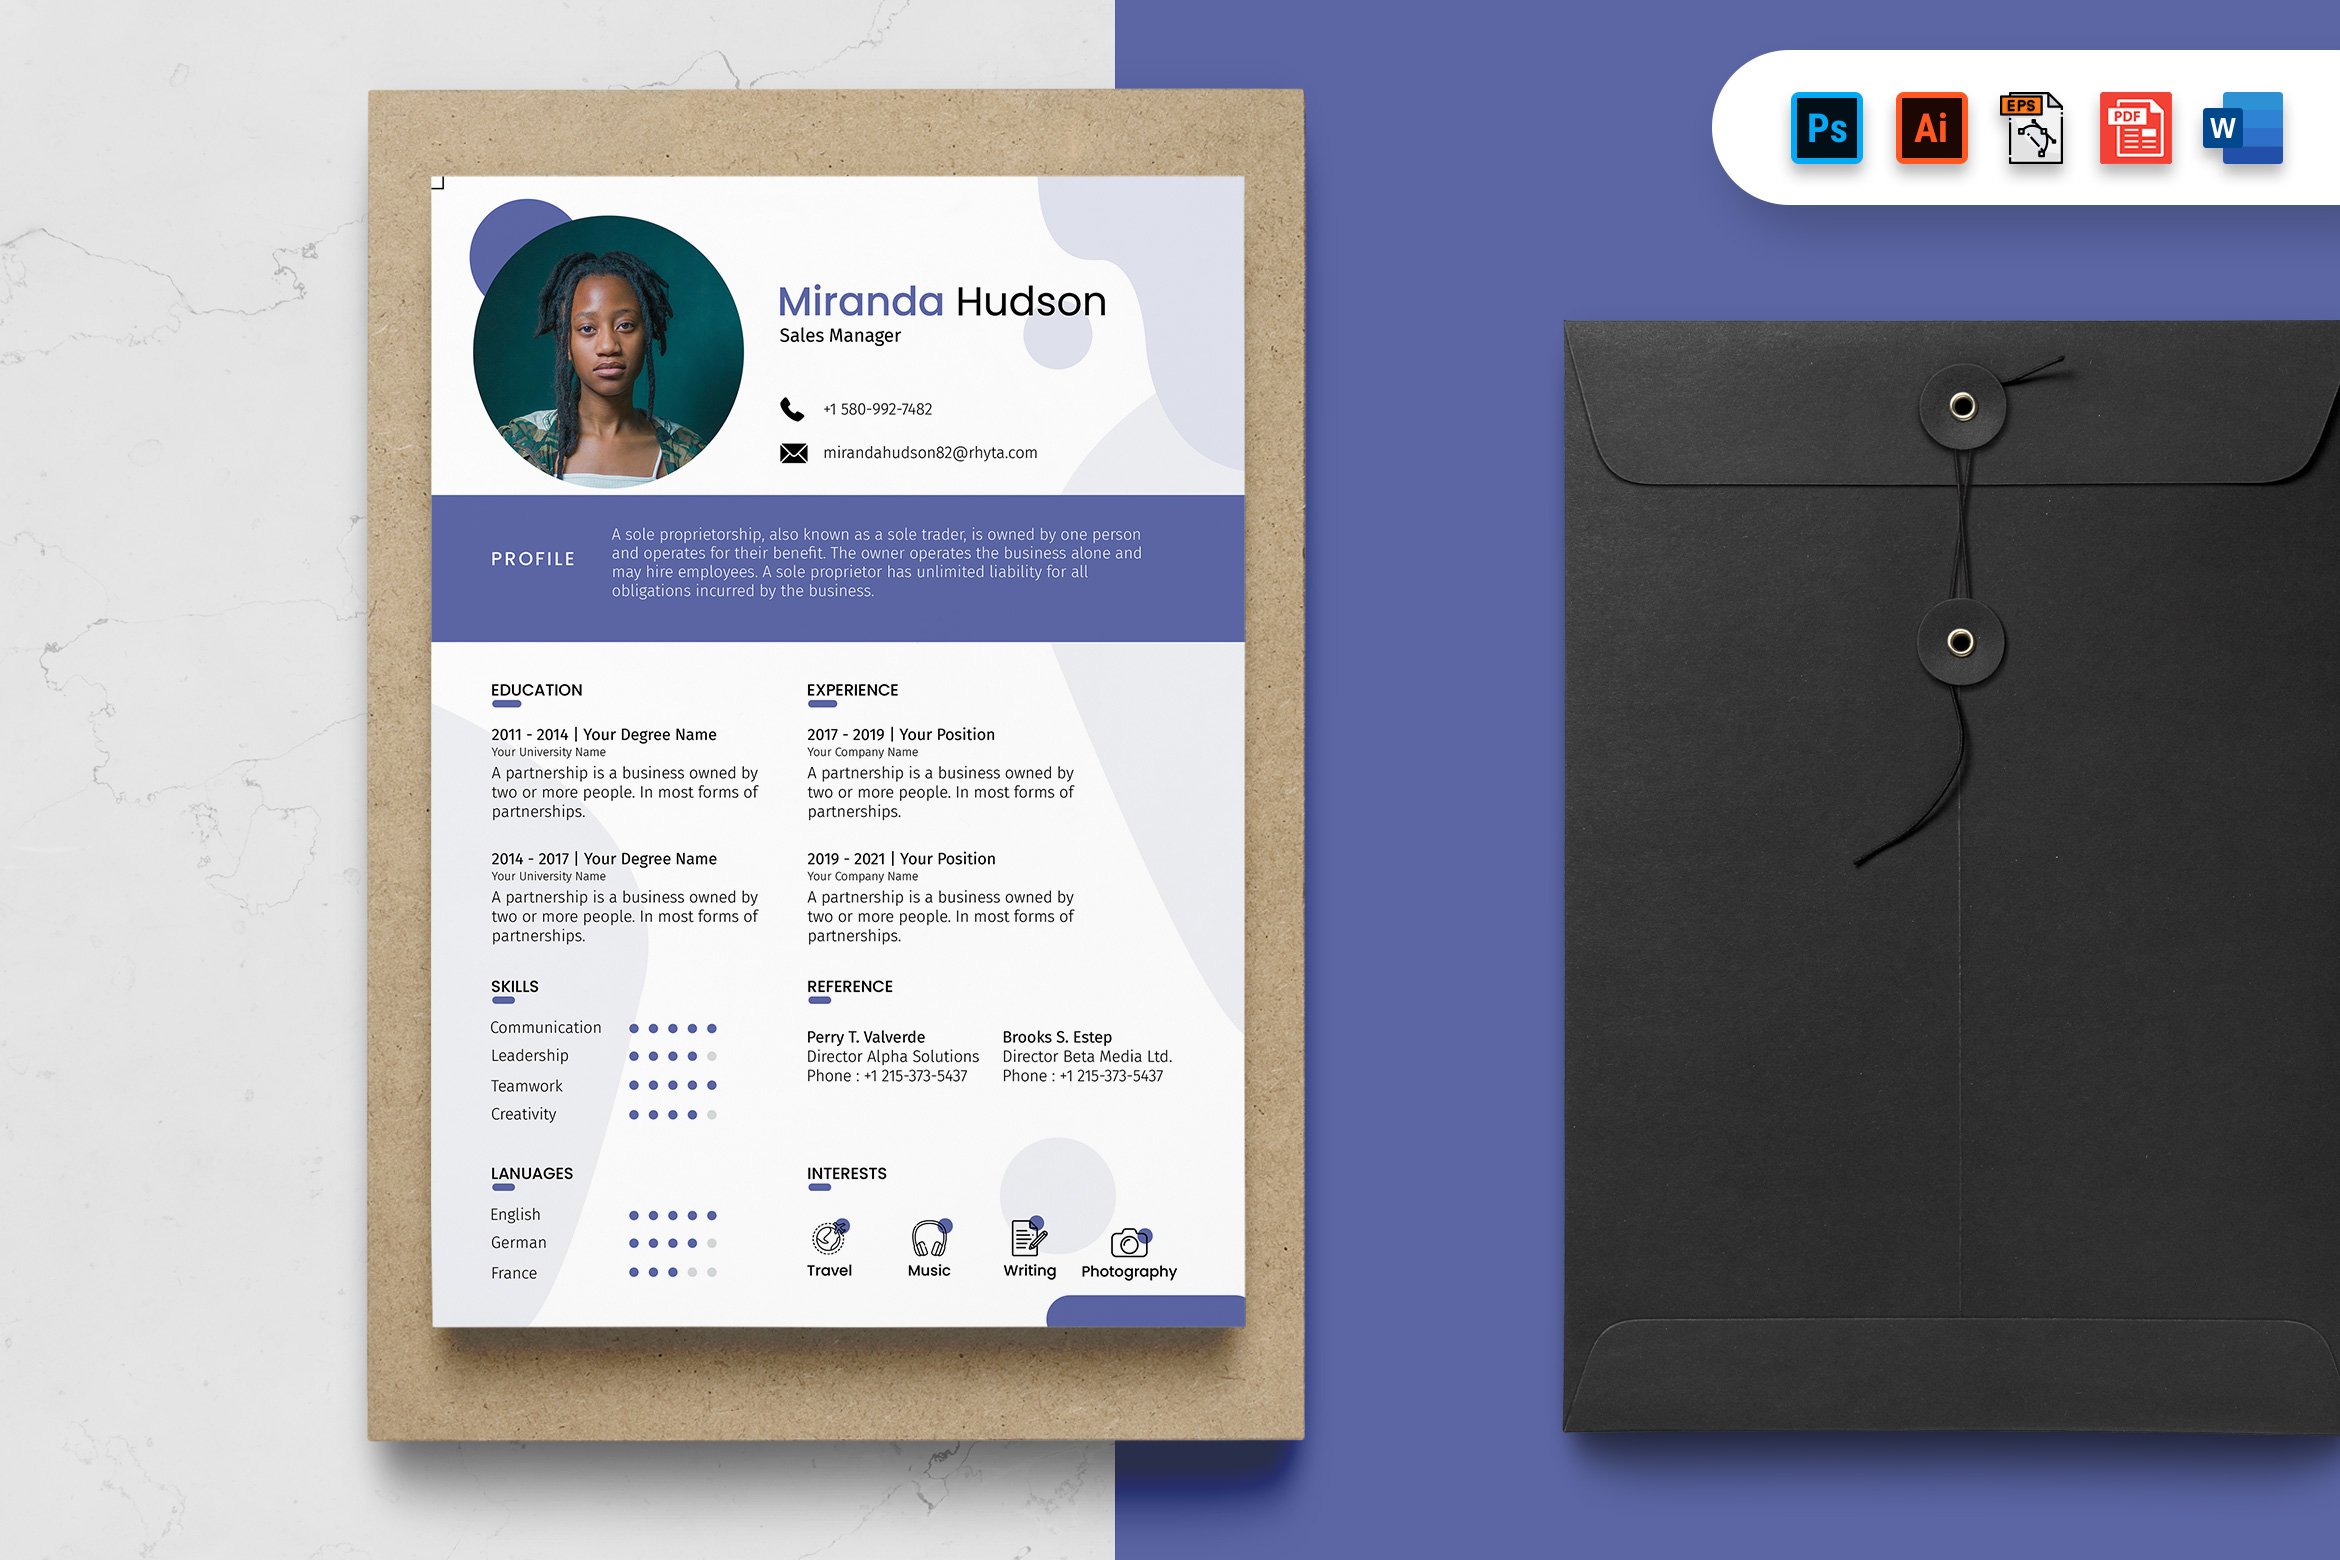 Marketing Manager CV Resume Template cover image.